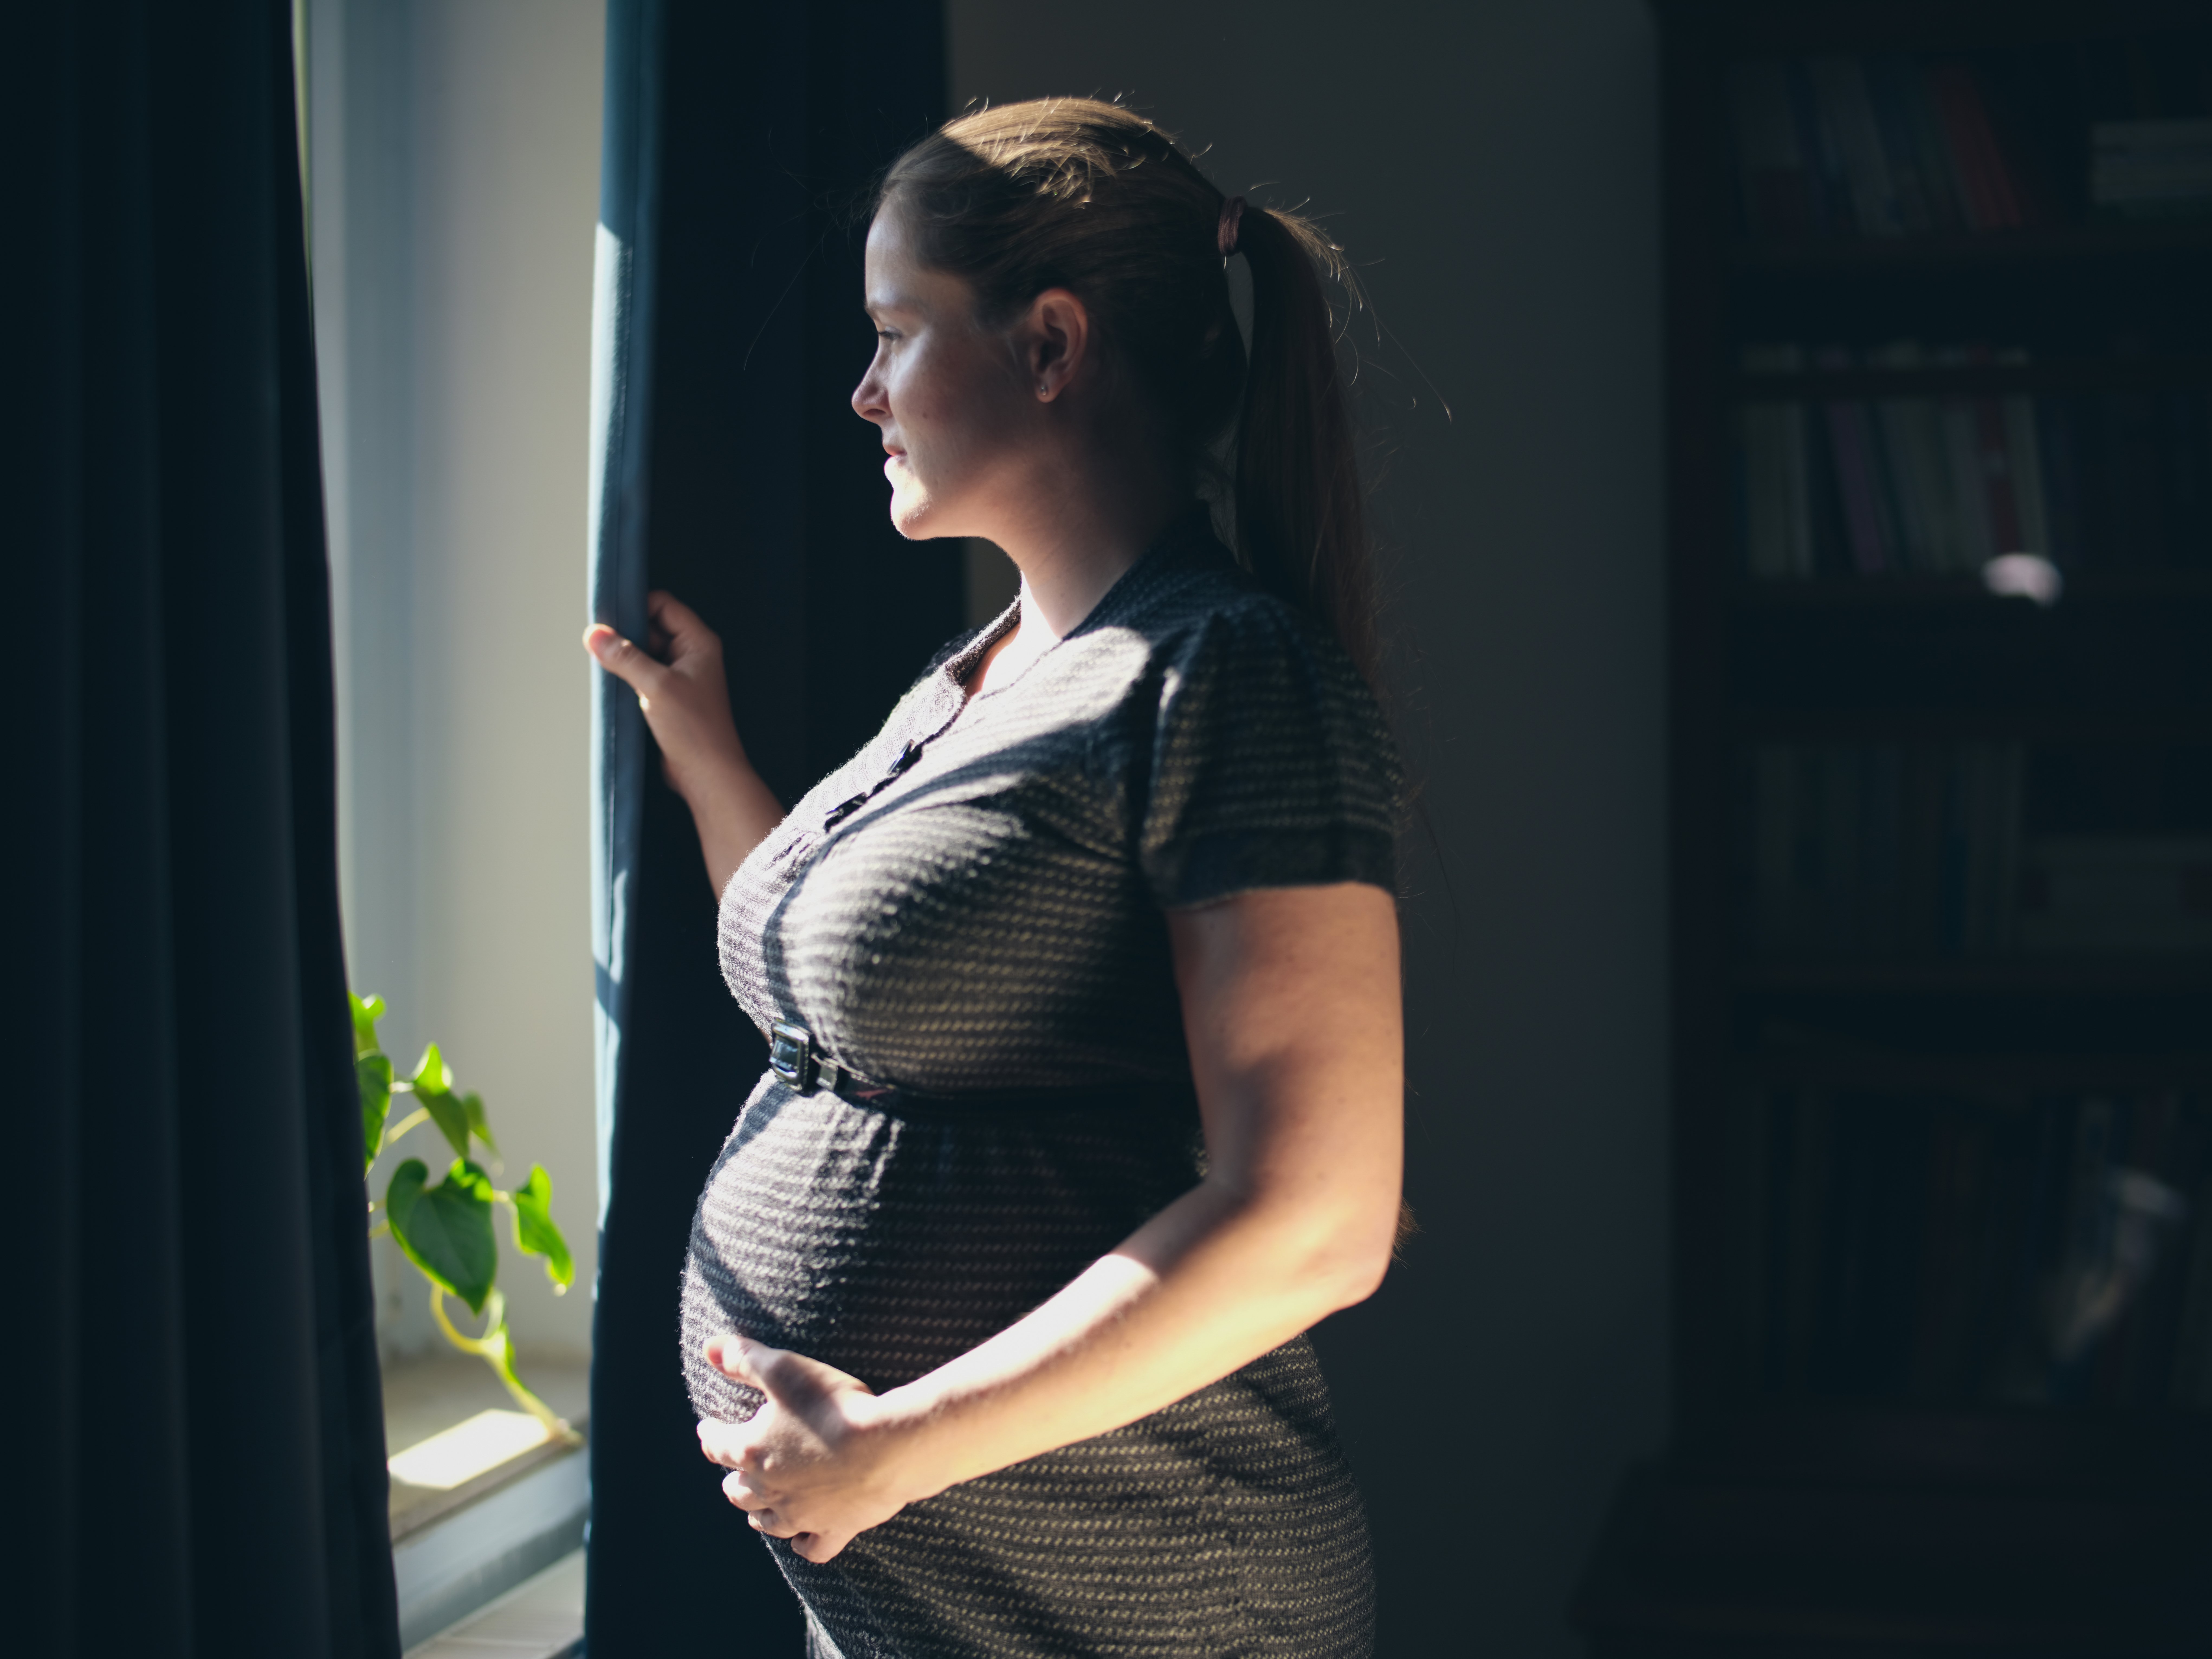 A pregnant woman gazing out a window | Source: Shutterstock